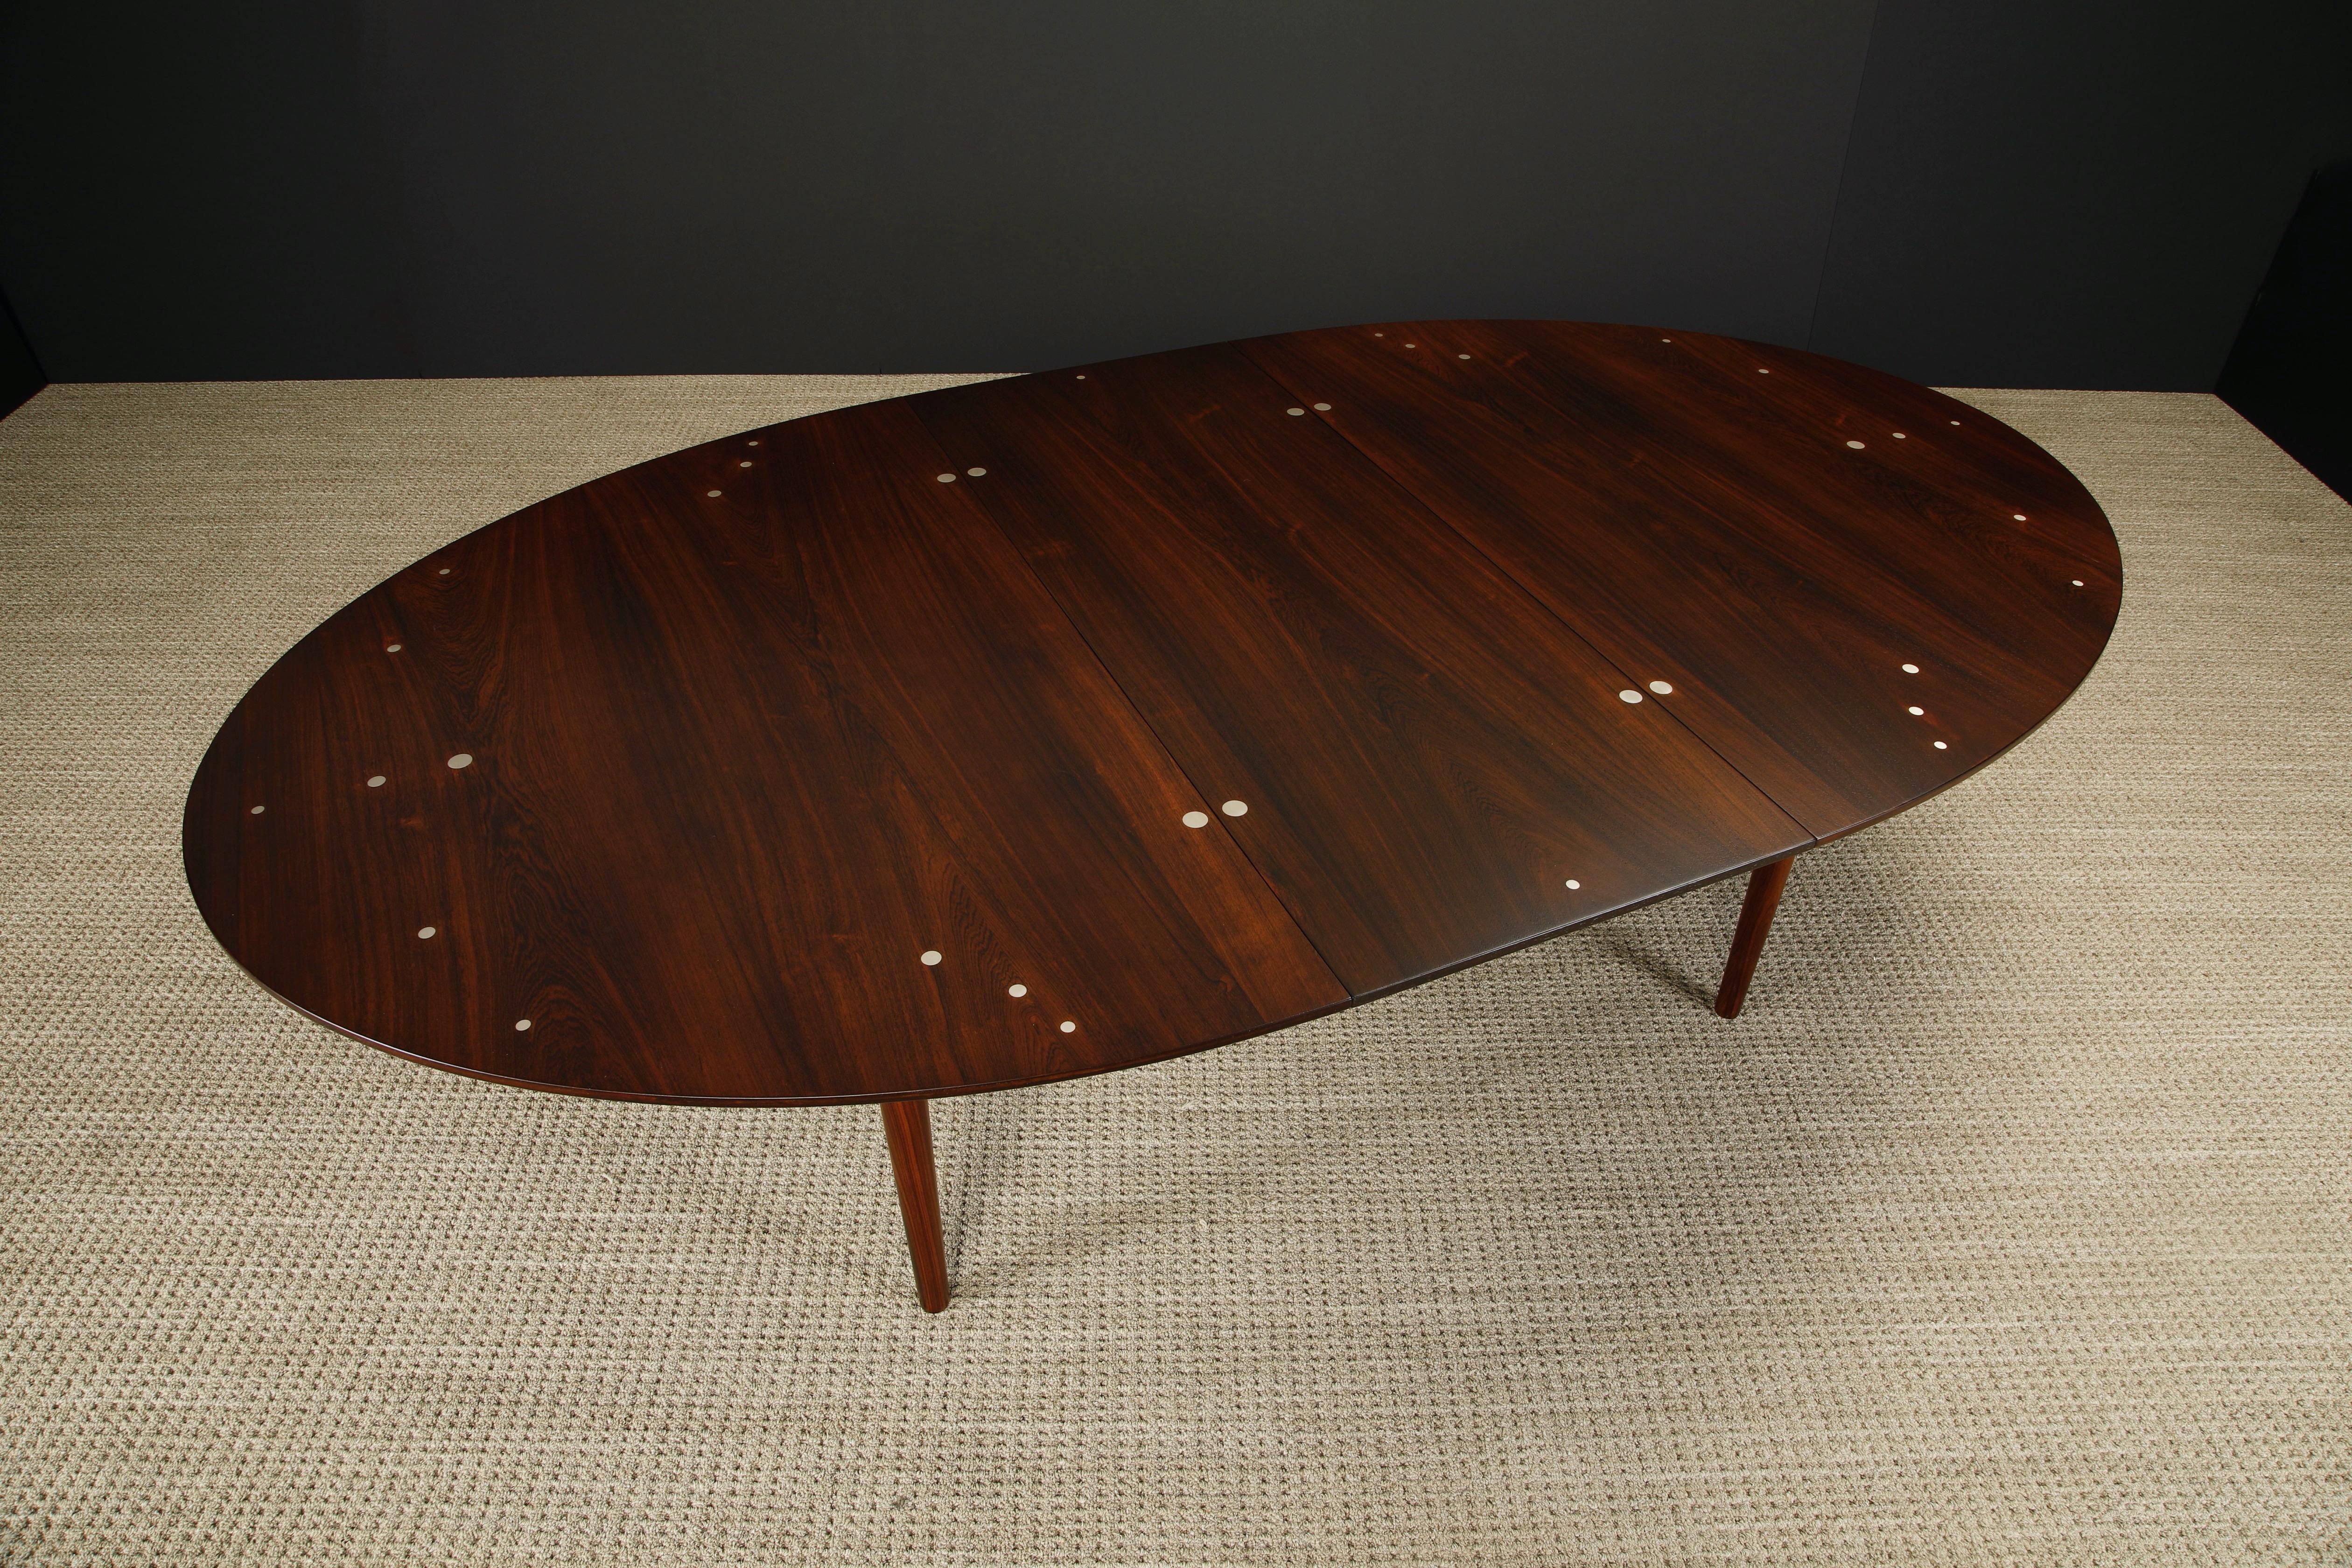 Finn Juhl 'Judas' Rosewood and Sterling Silver Dining Table, c 1950s, Signed For Sale 5